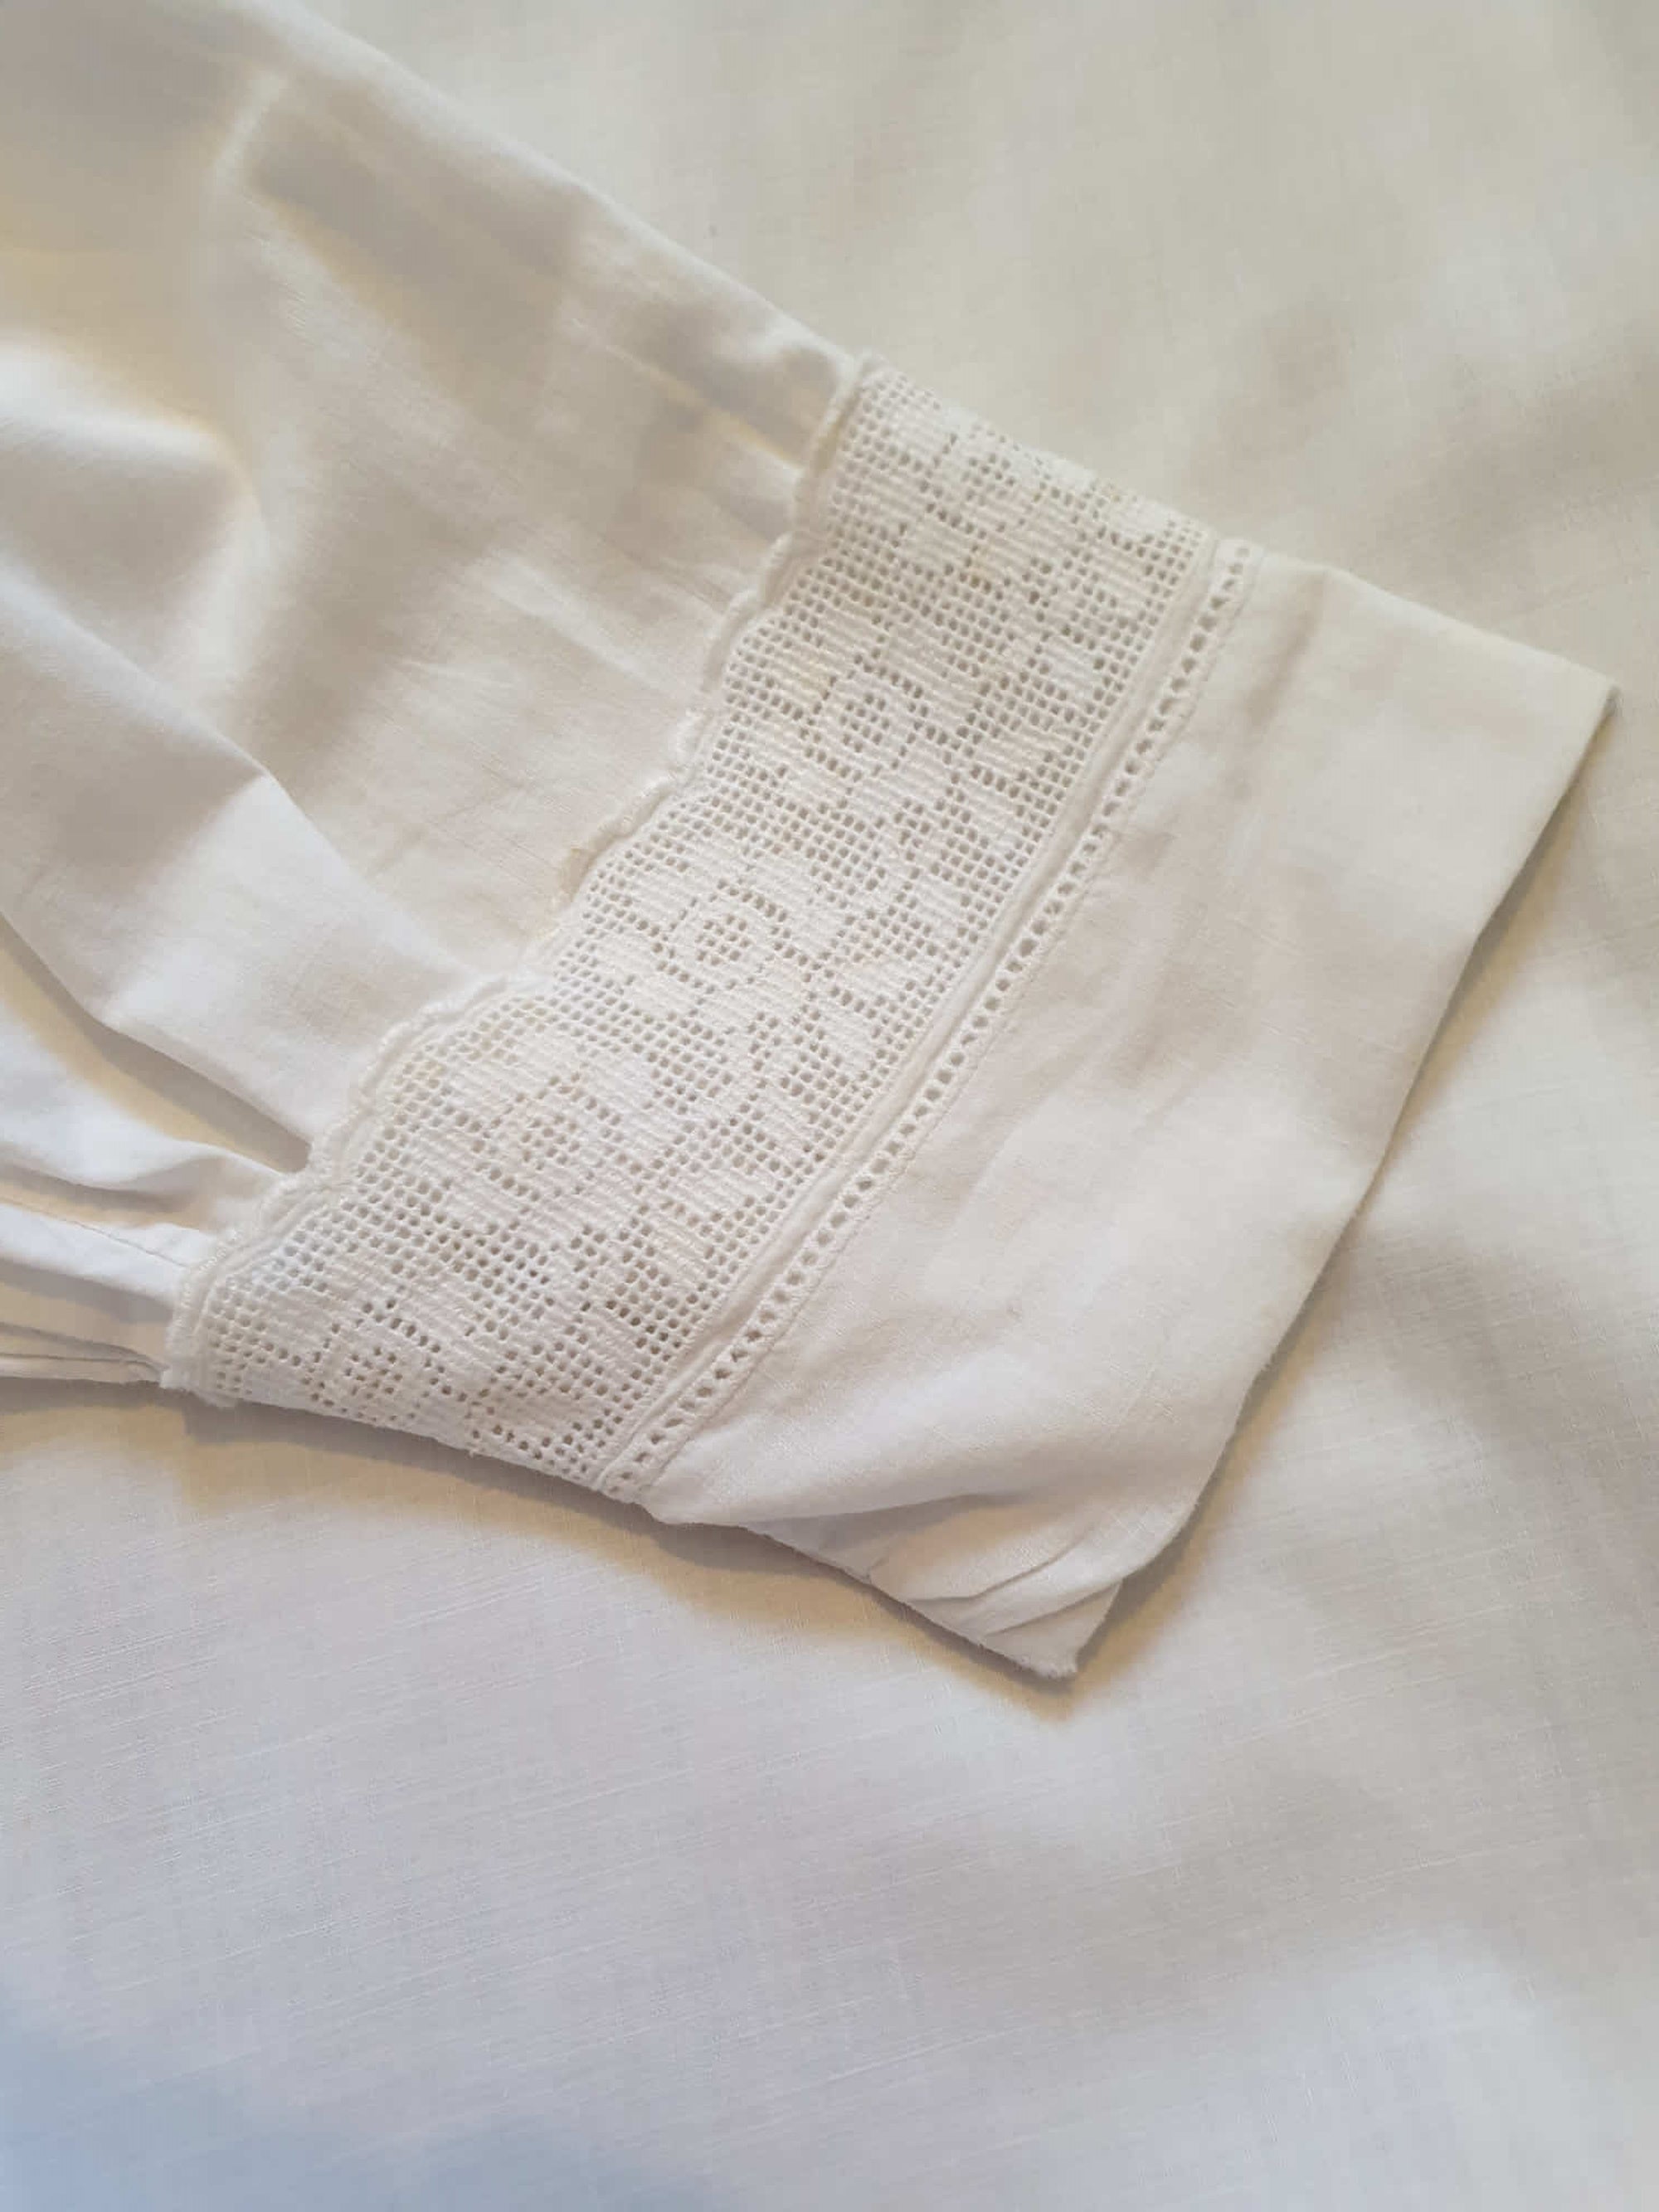 Antique edwardian white cotton nightgown with filet lace and embroidery detail medium